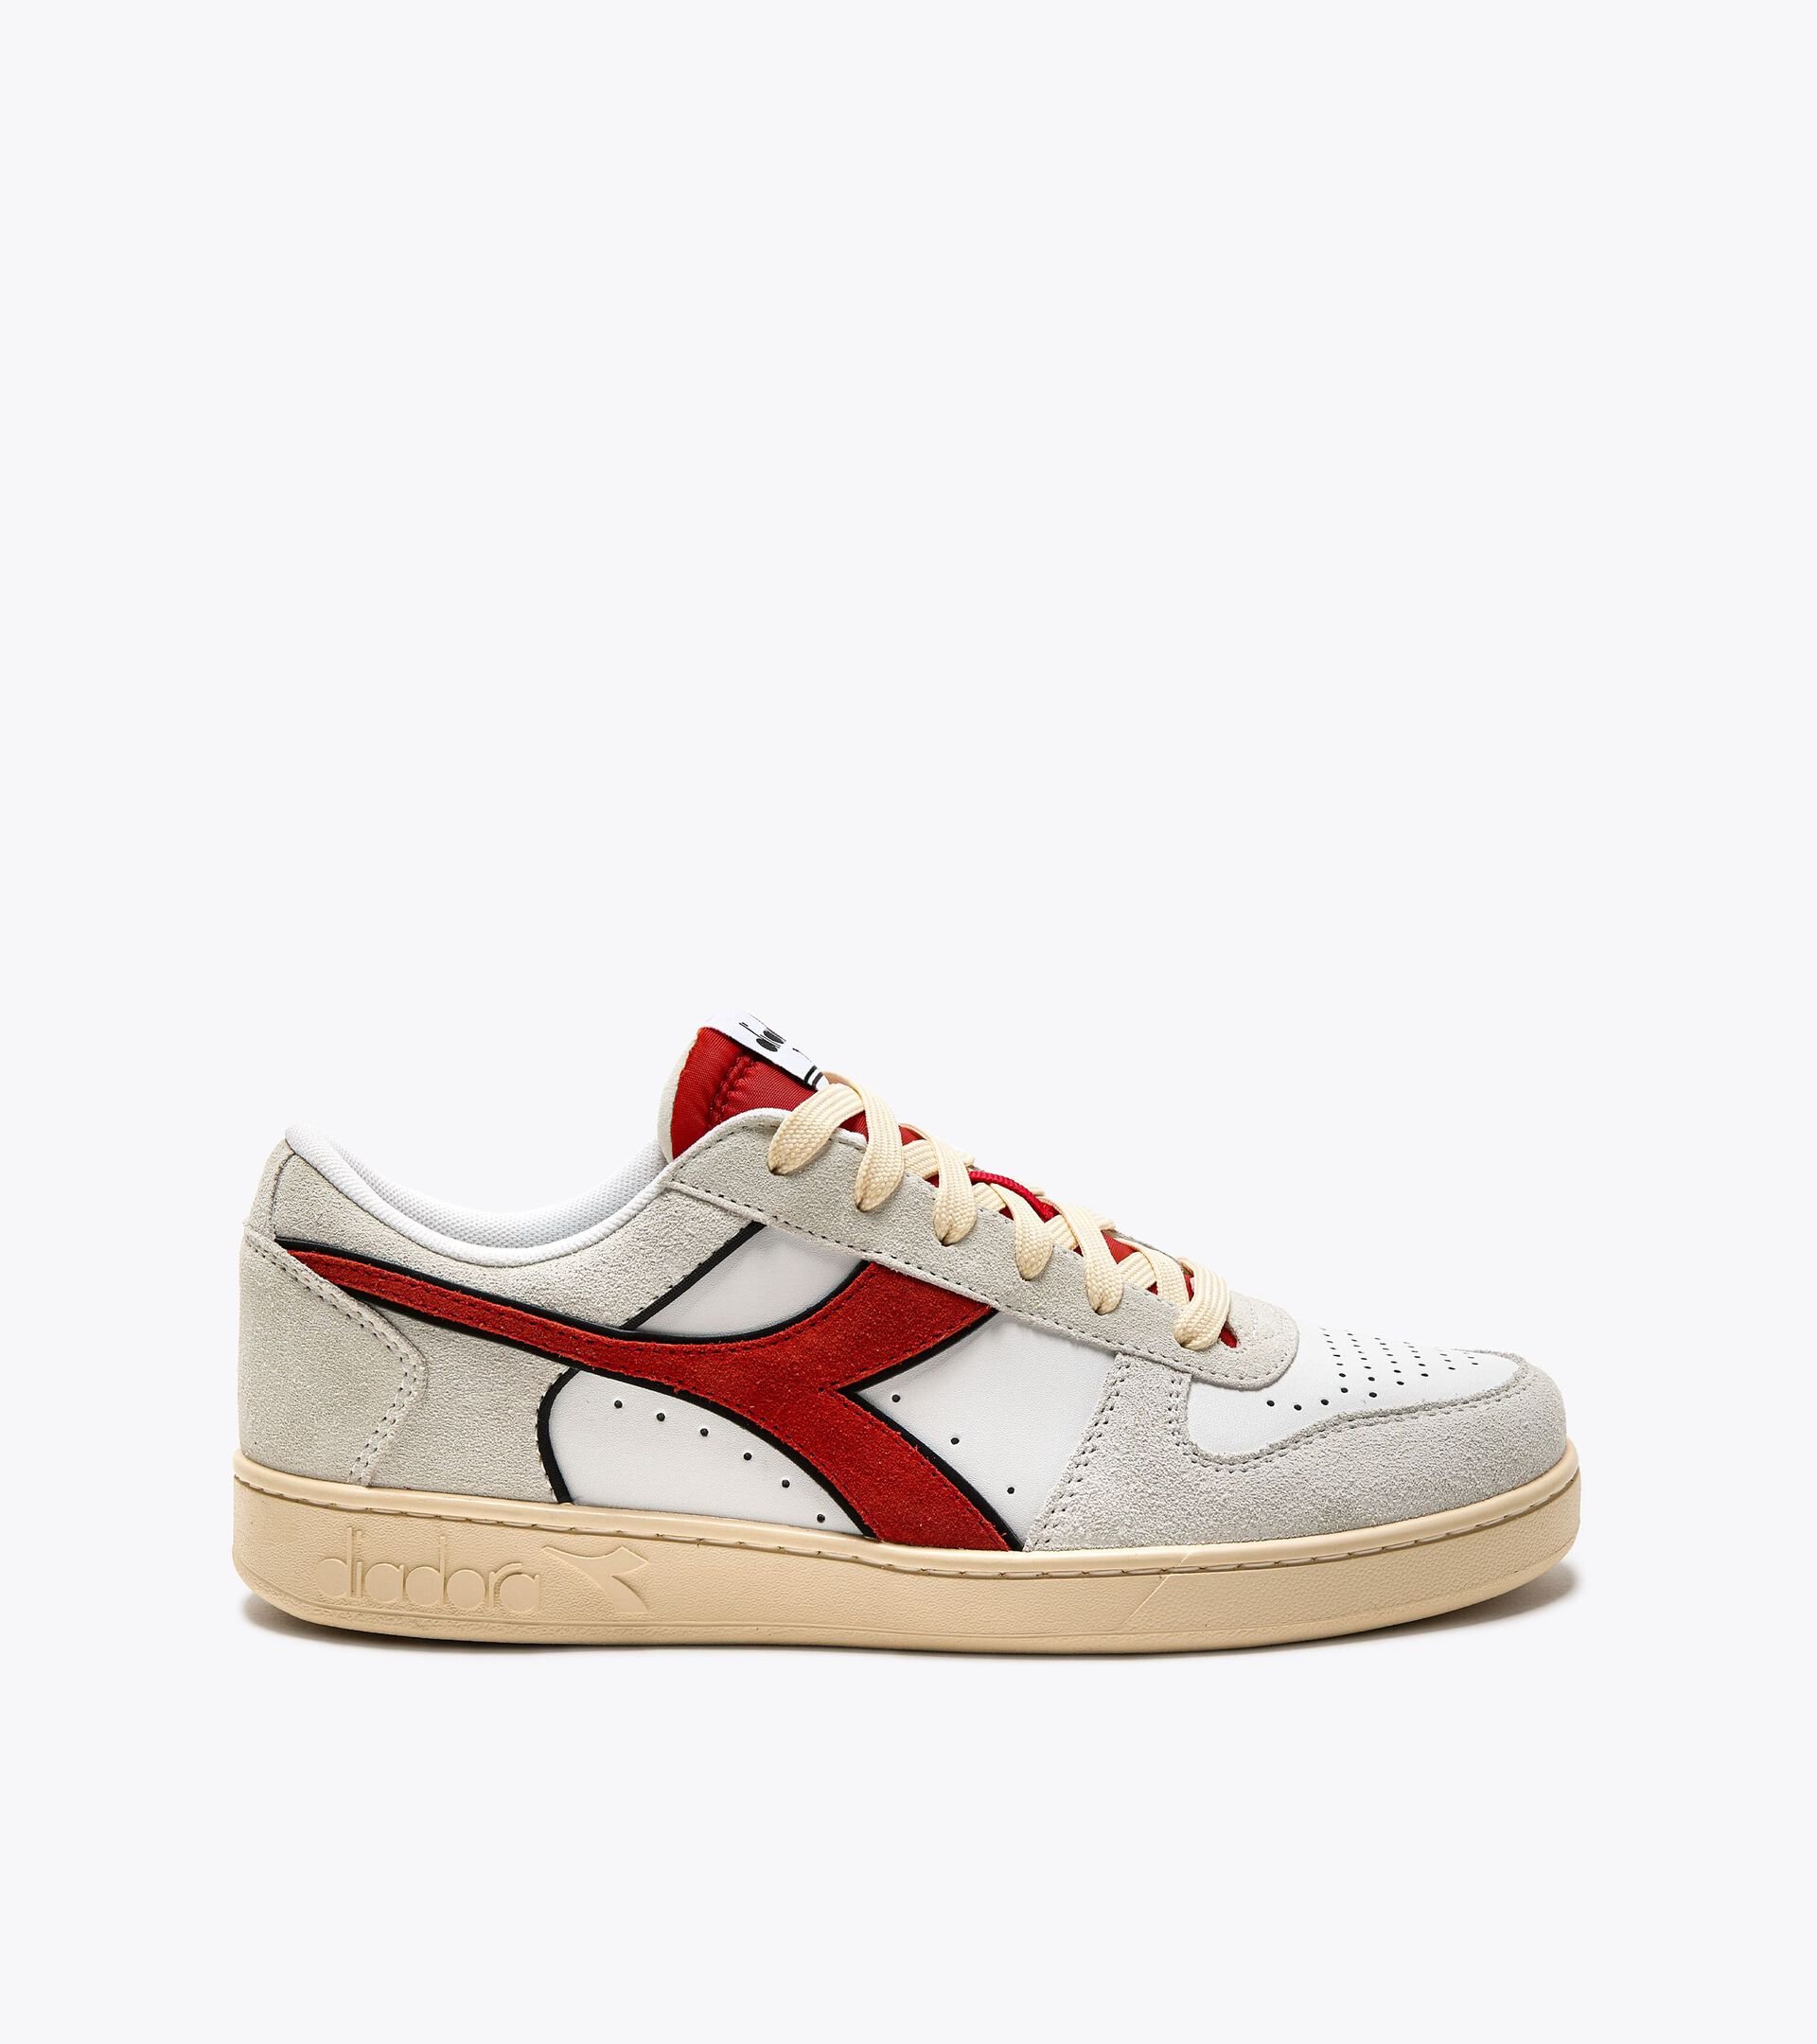 Sporty sneakers - Gender neutral MAGIC BASKET LOW SUEDE LEATHER WHITE/FERRARI RED ITALY - Diadora